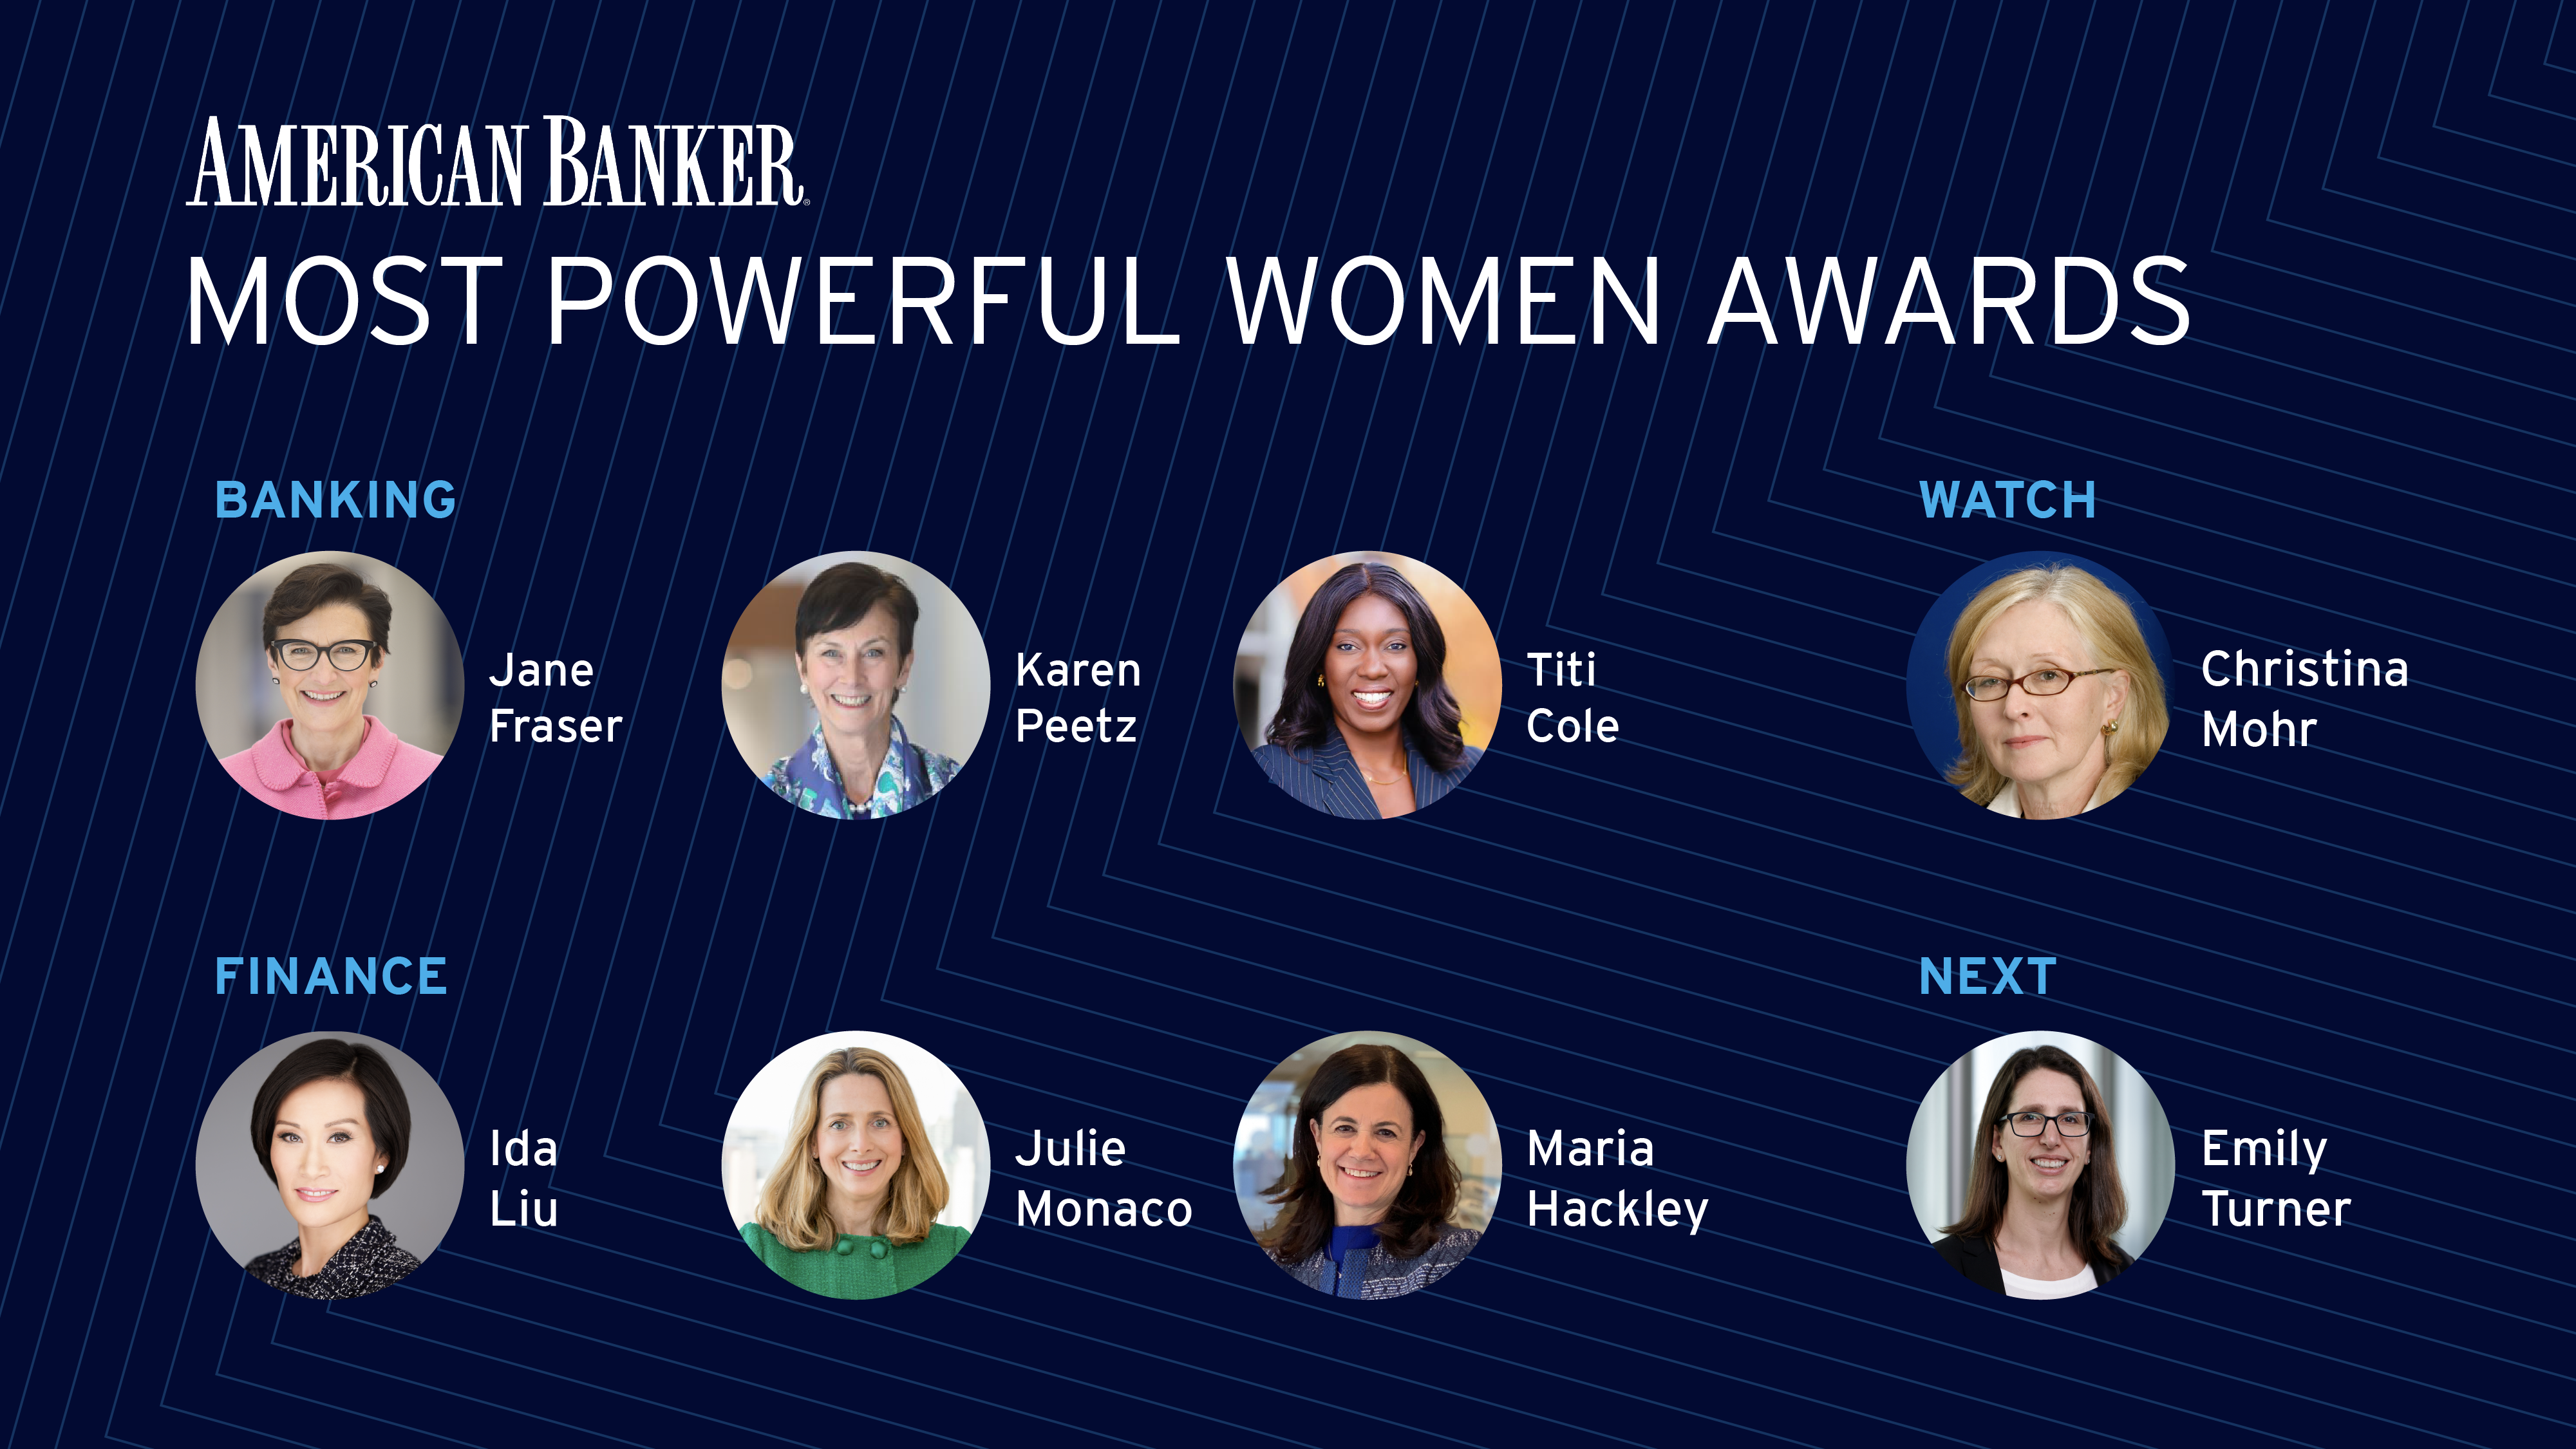 American Banker's 2022 Most Powerful Women Awards